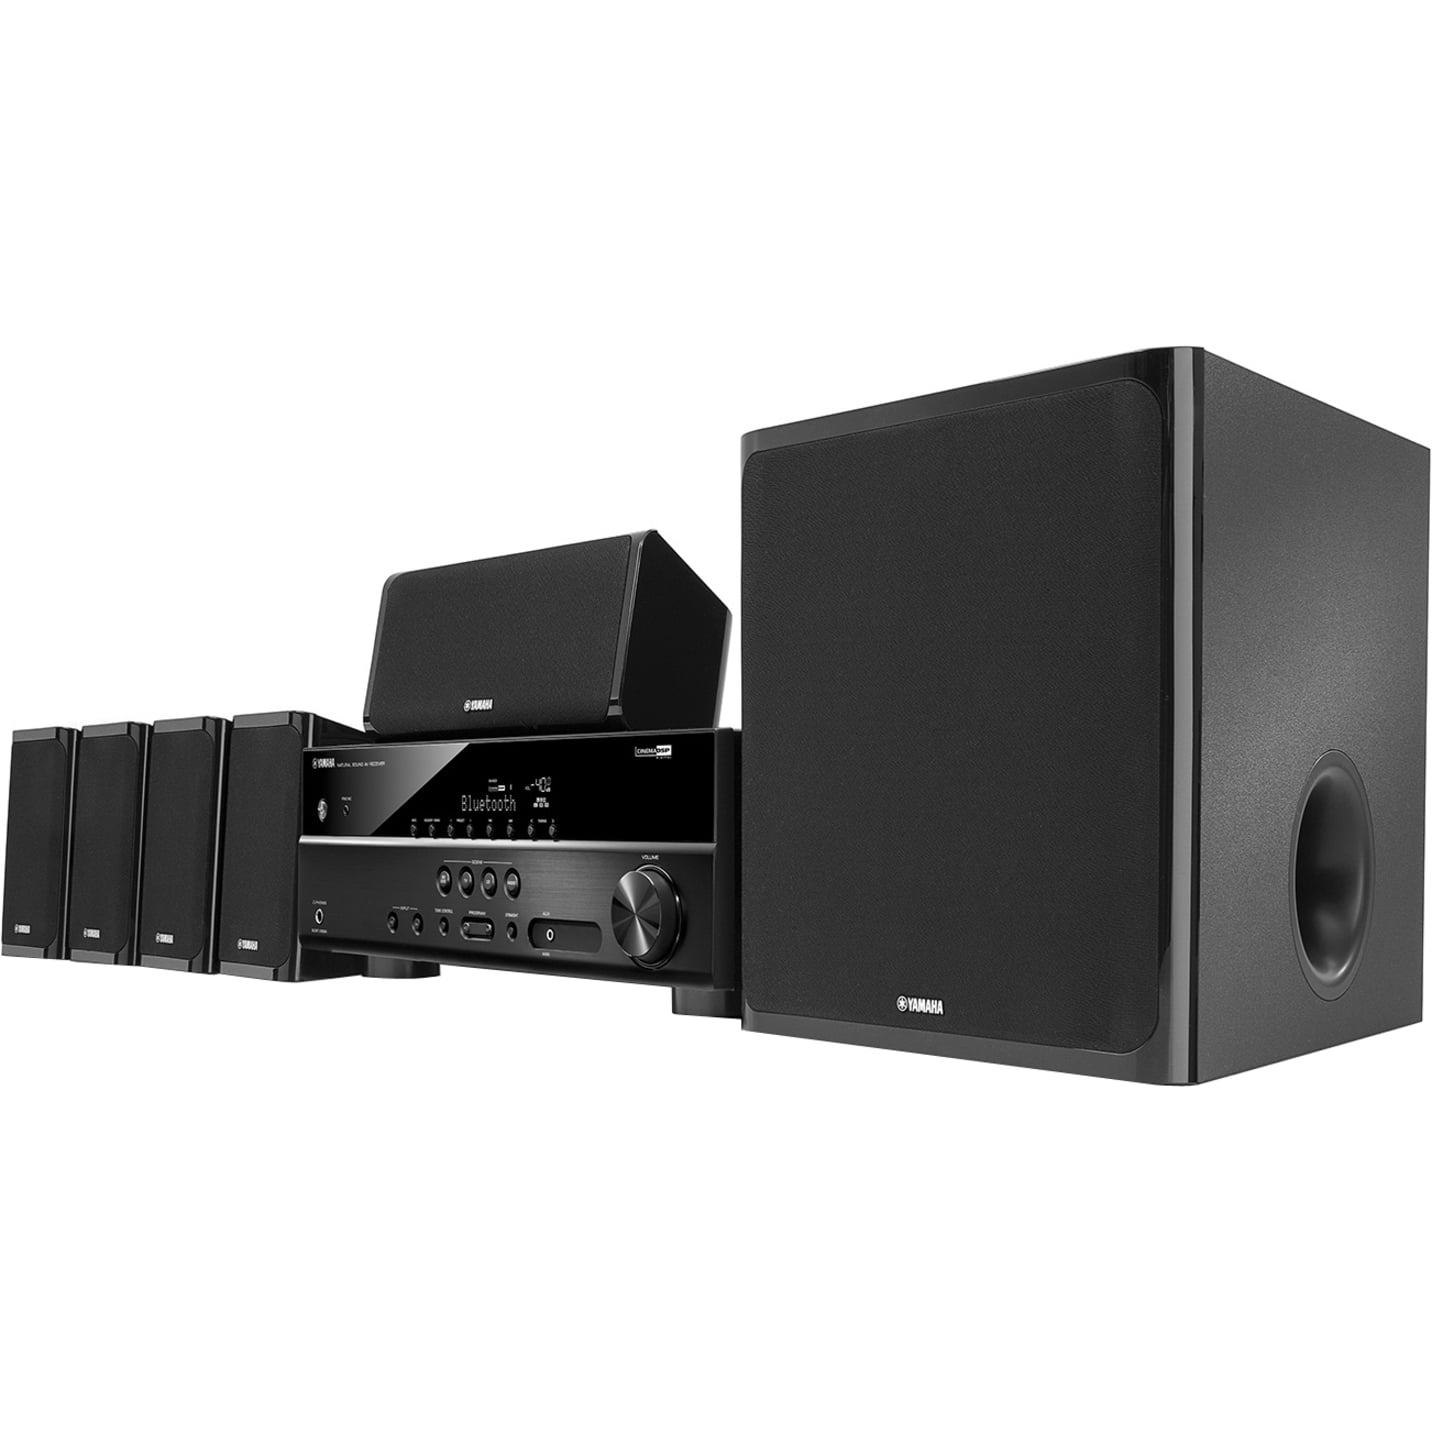 Yamaha YHT-4920UBL 5.1 Home Theater System, A/V Receiver, Gloss Black